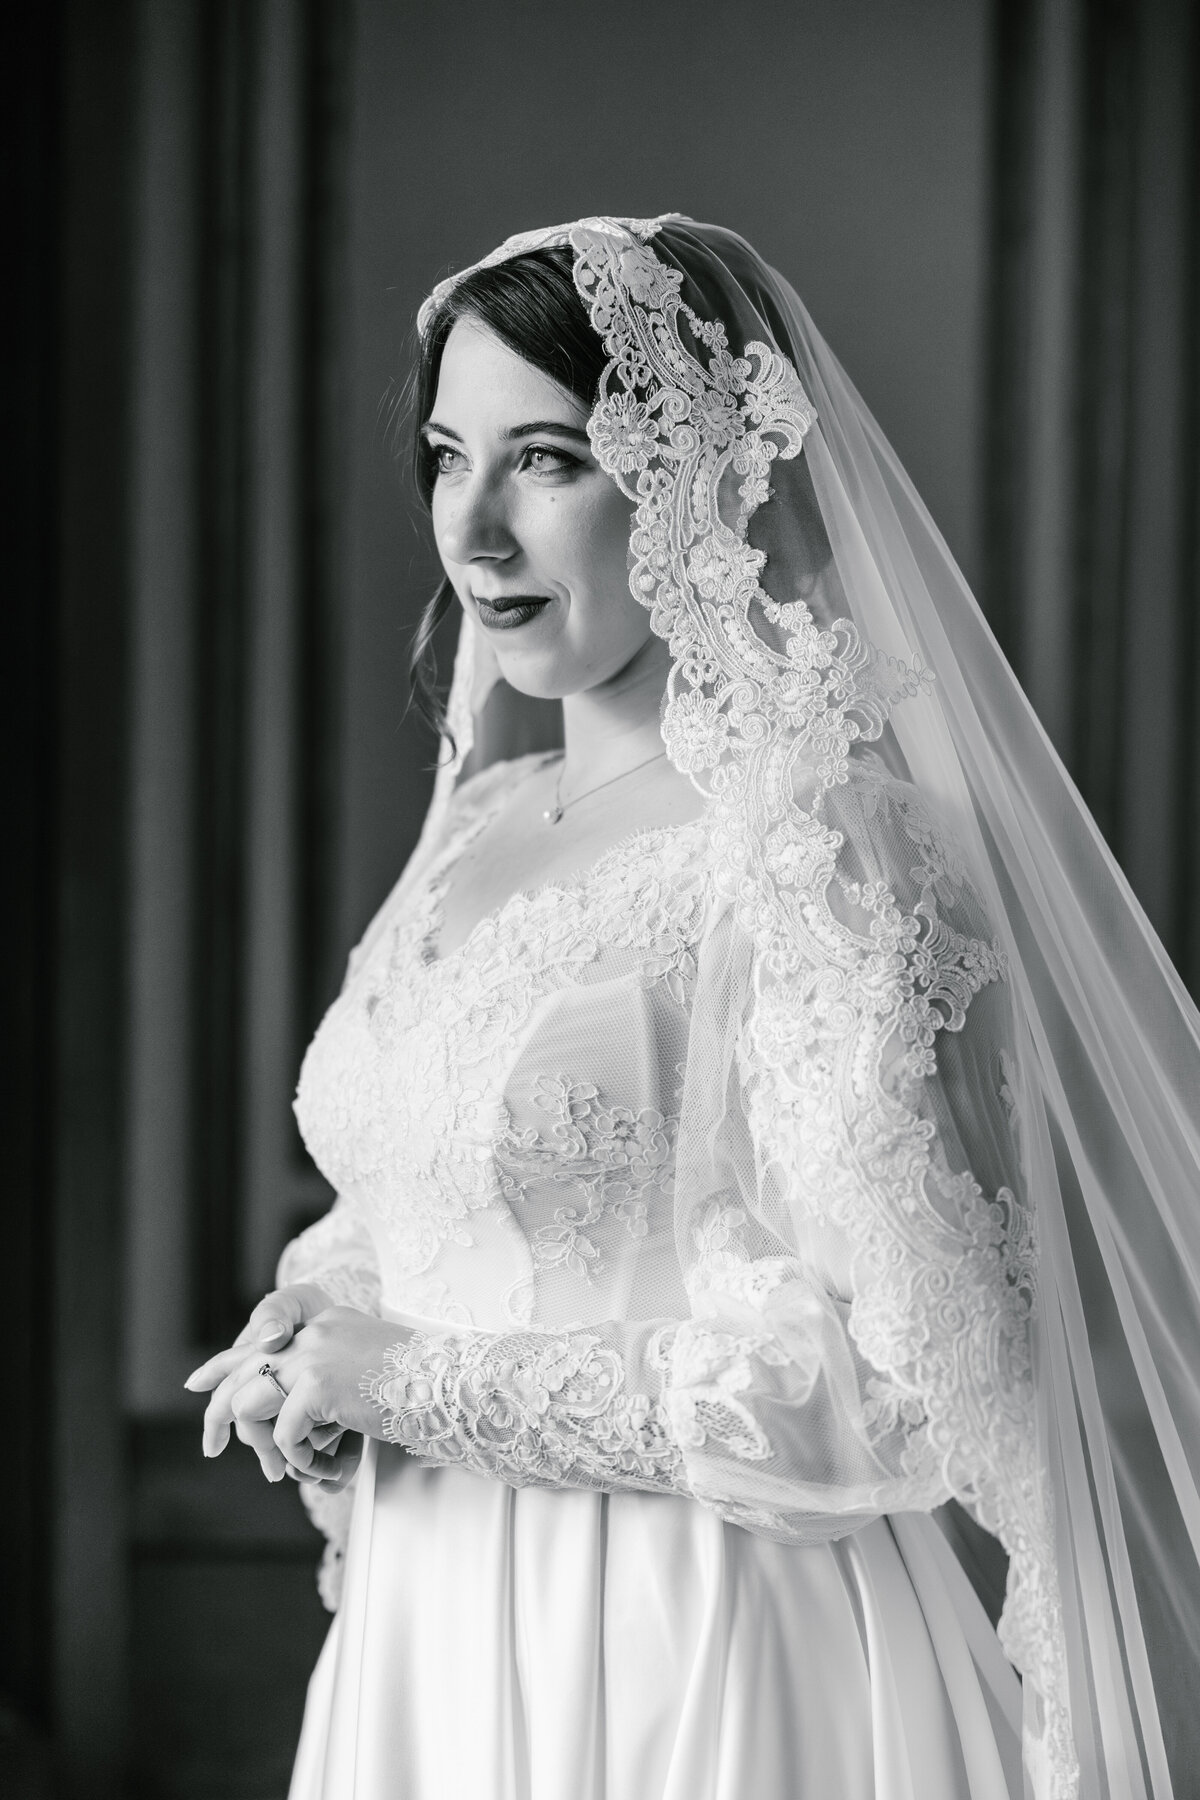 Black and white portrait of a bride looking to the side wearing a lace veil